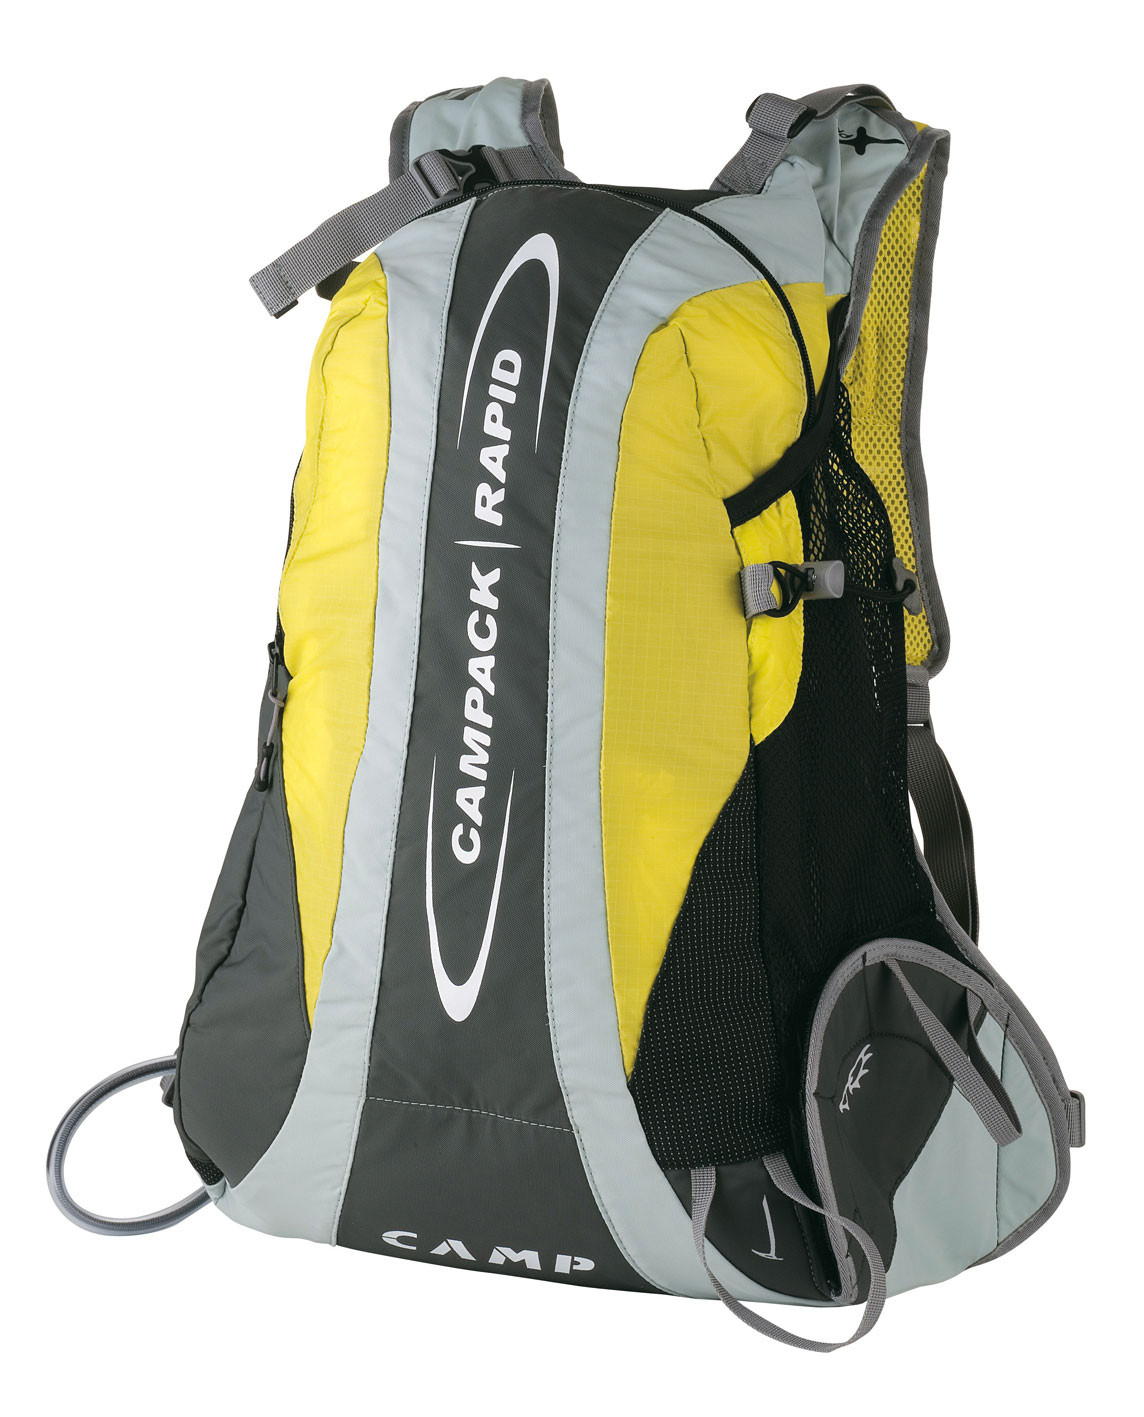 Competitive Ski Mountaineering Bag - Camp